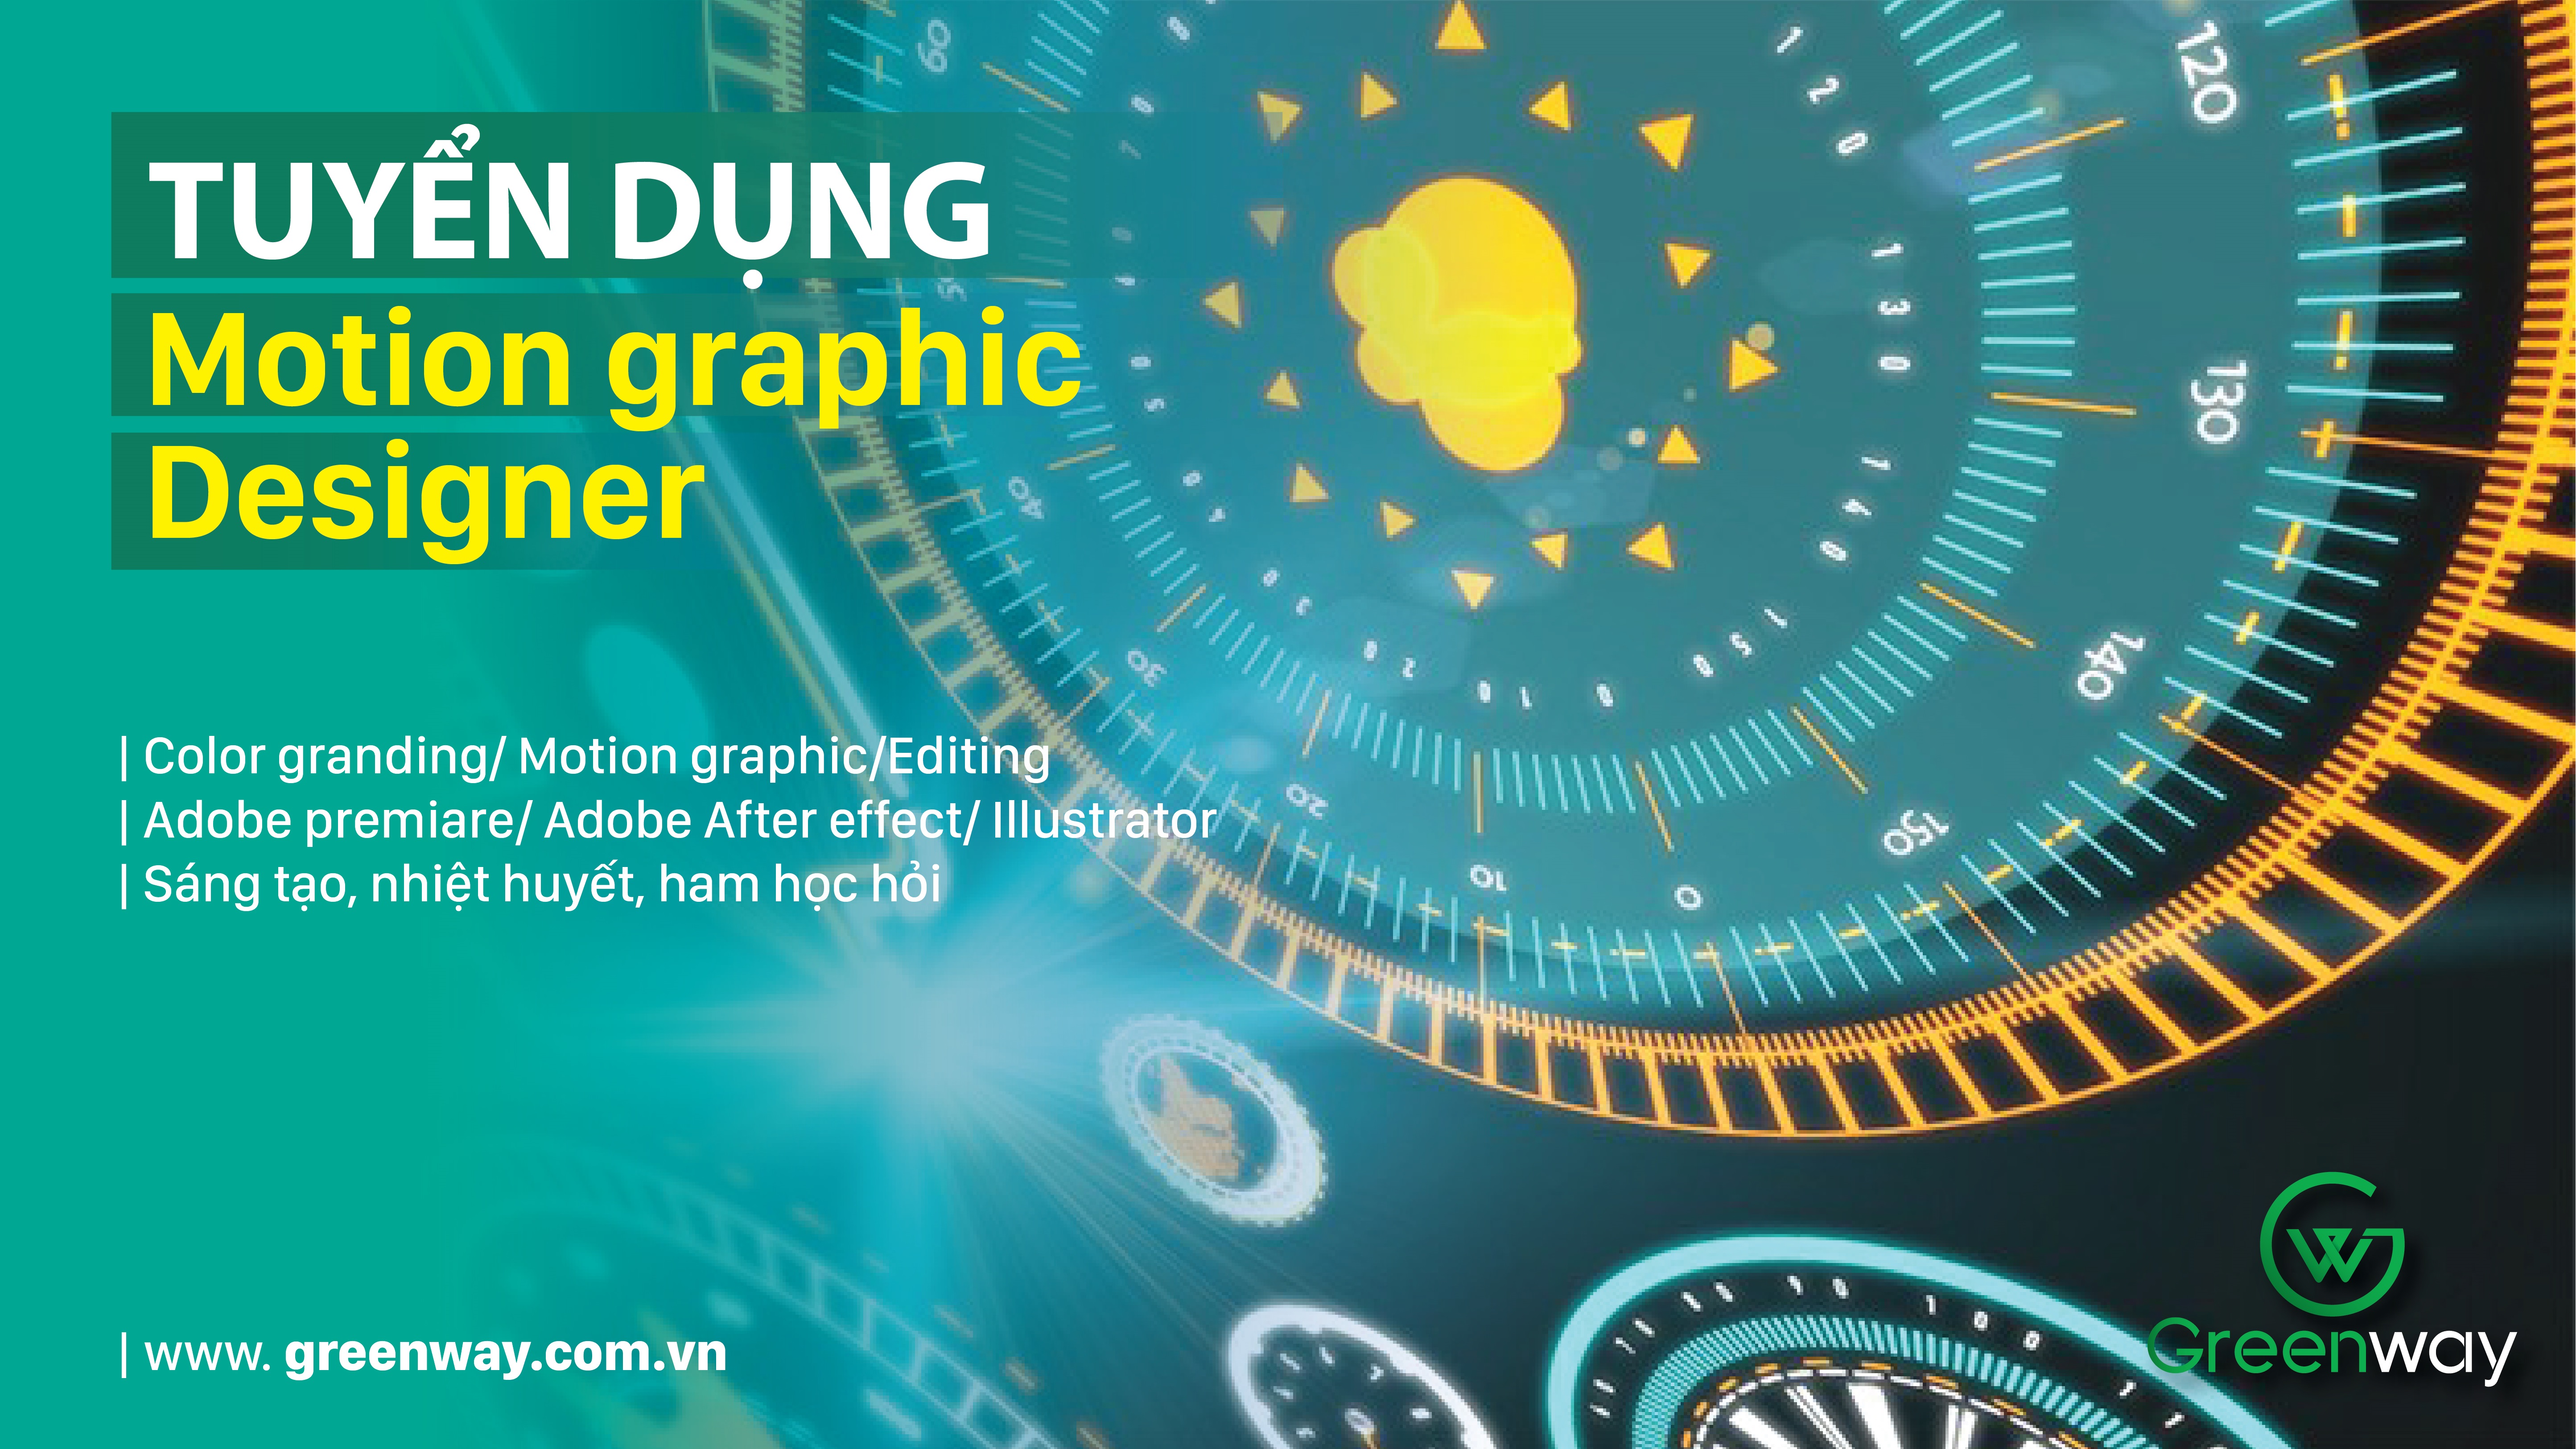 TUYỂN DỤNG MOTION GRAPHIC DESIGNER